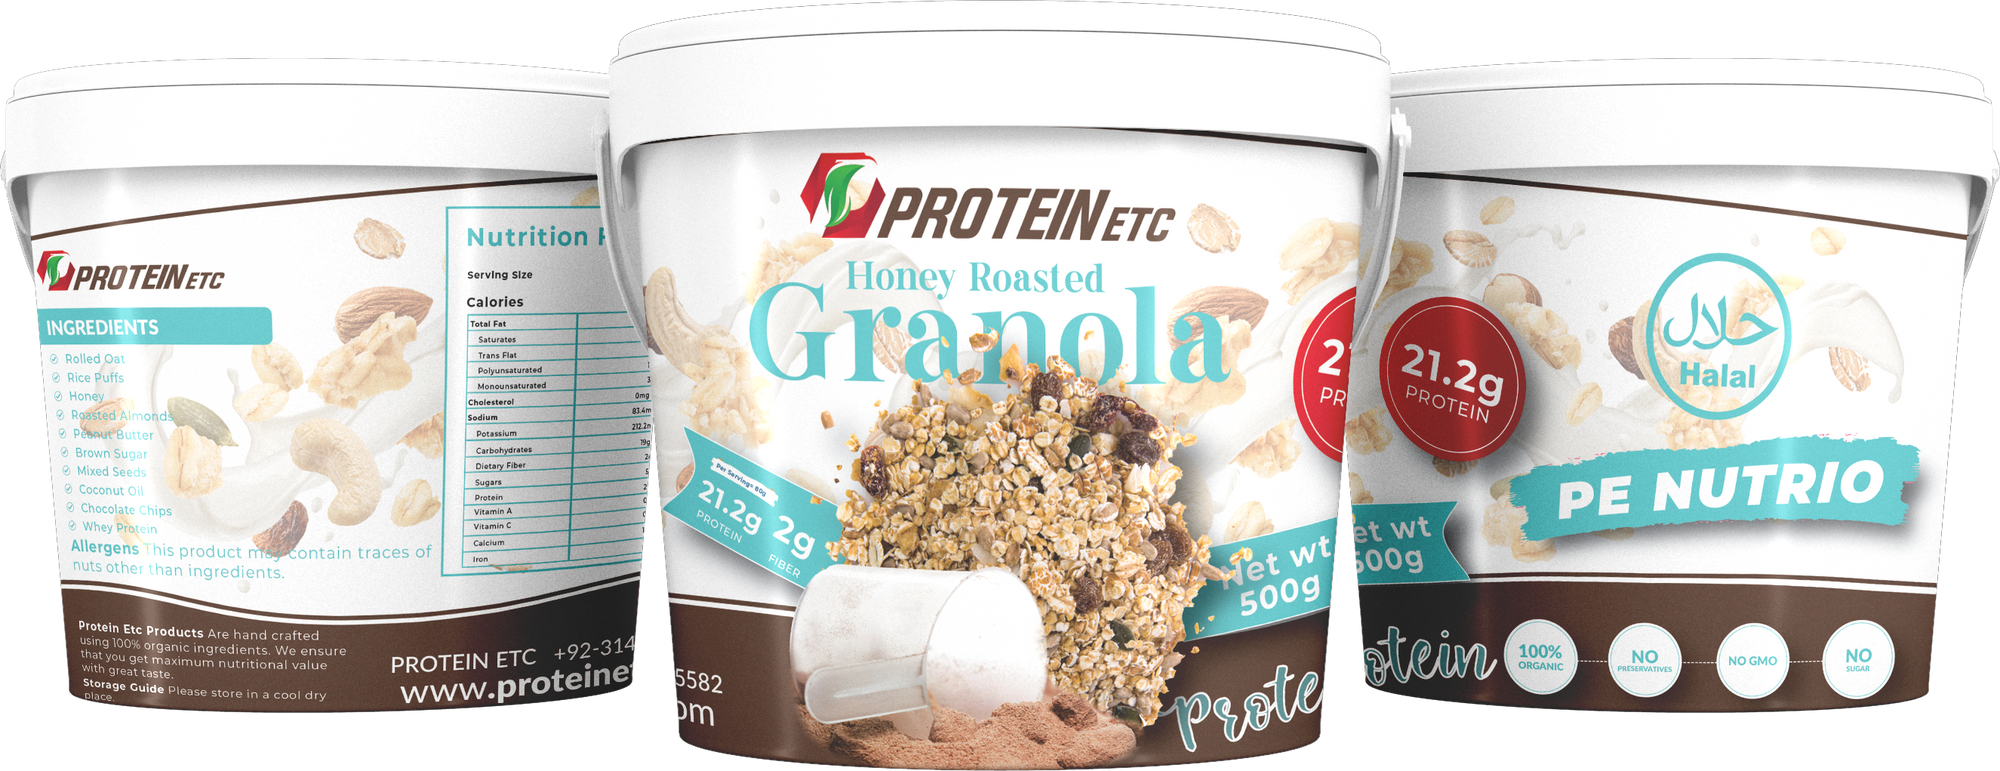 Honey Roasted Granola Cereal - Protein